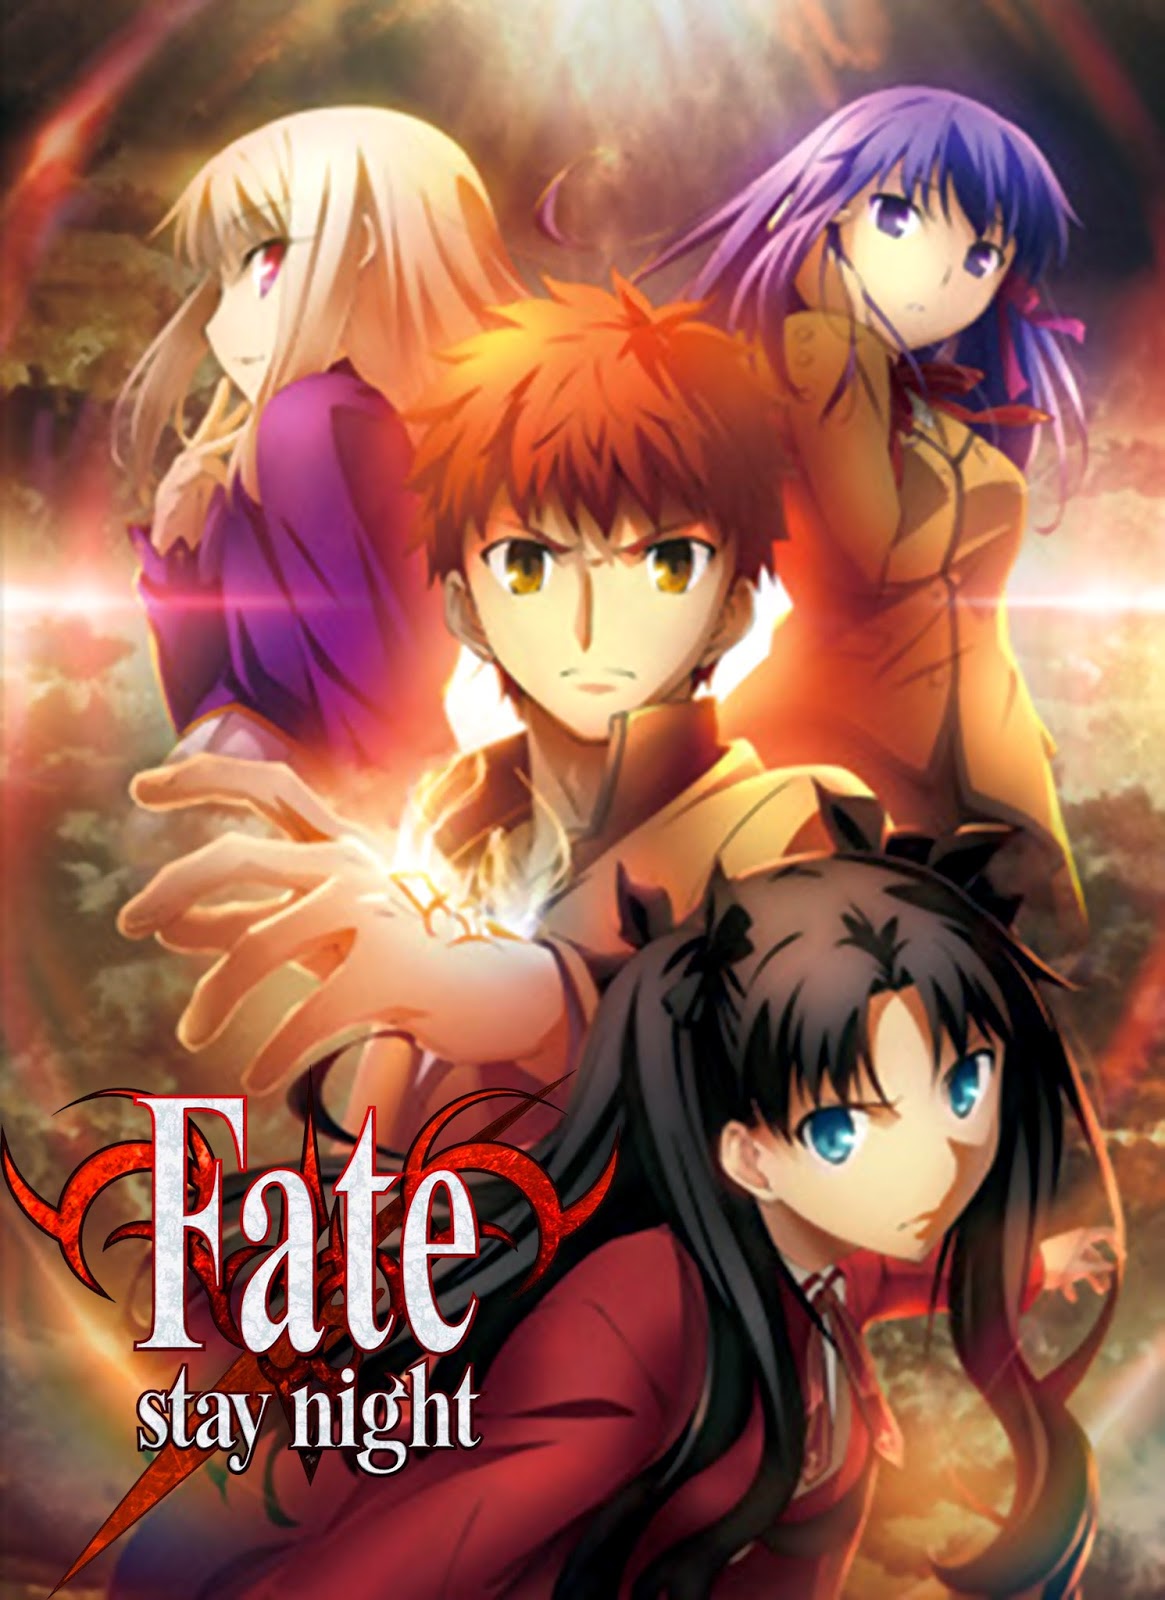 New Fate Stay Night Visual for fall anime 2014